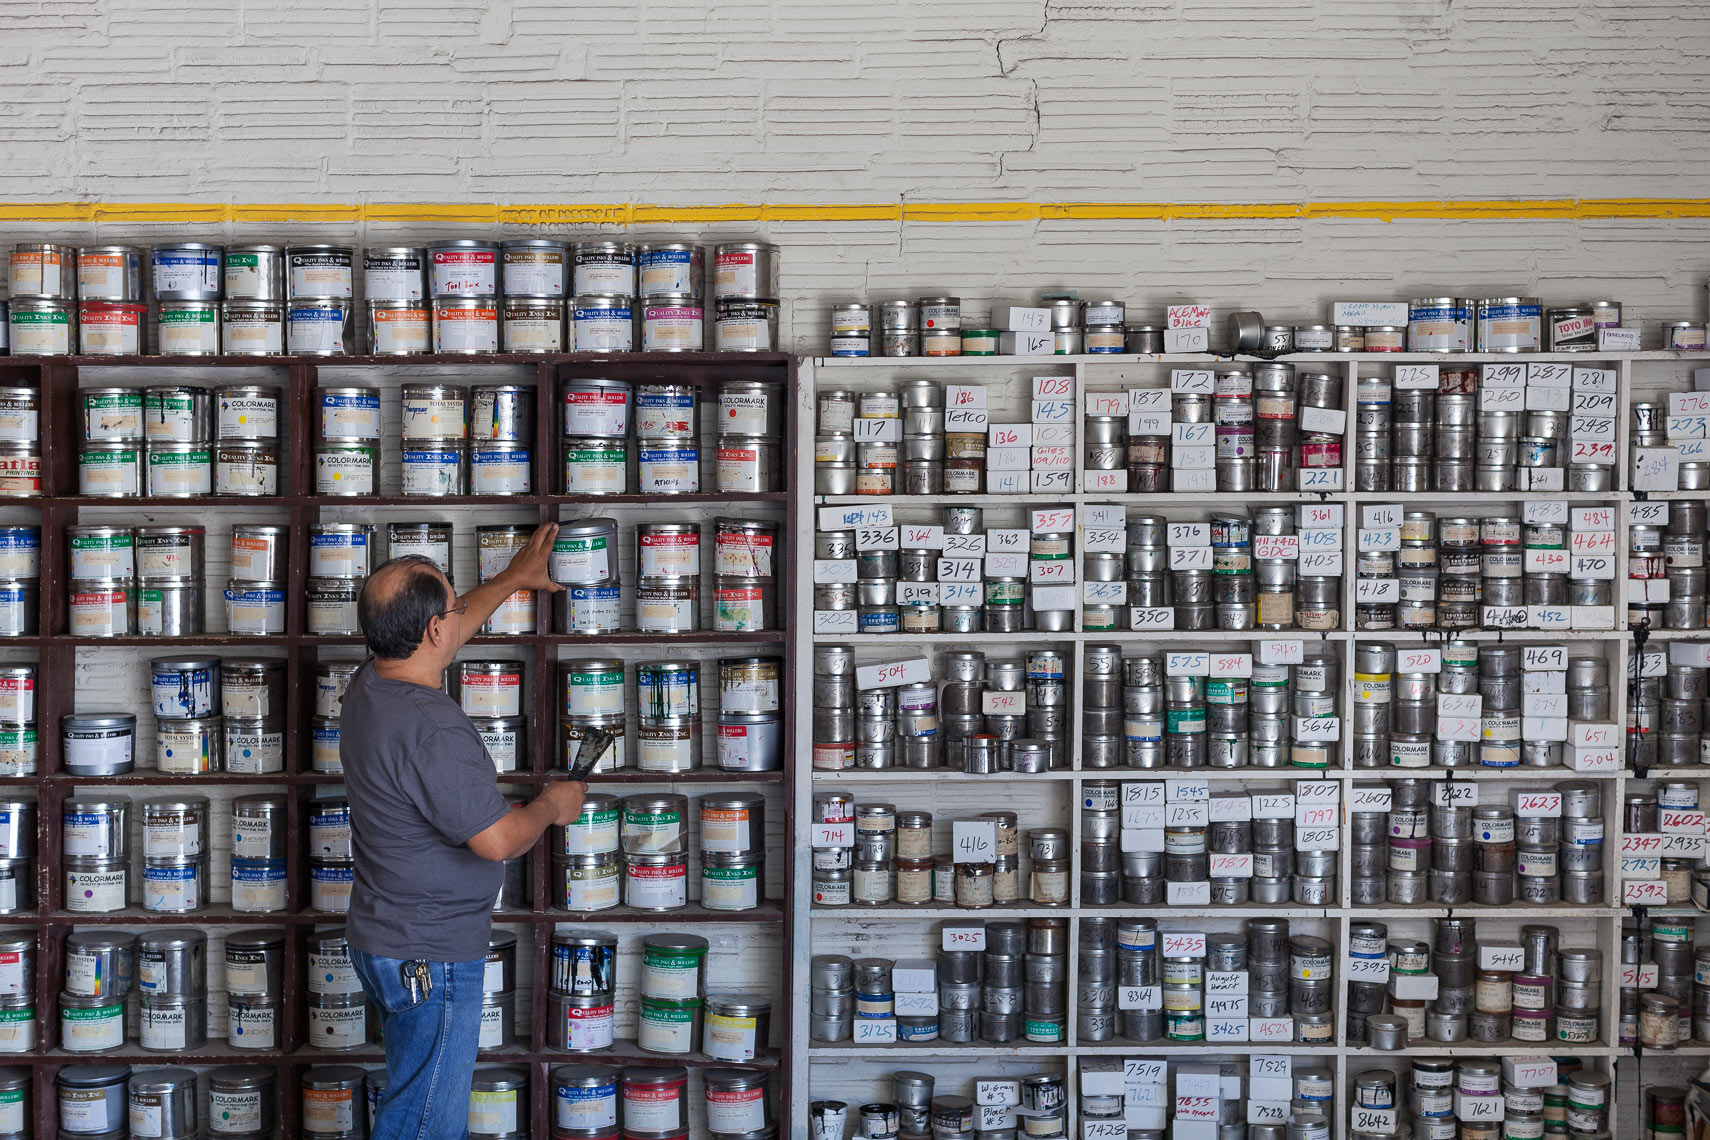 Printing Paint on Shelves Photographed by Jason Risner 